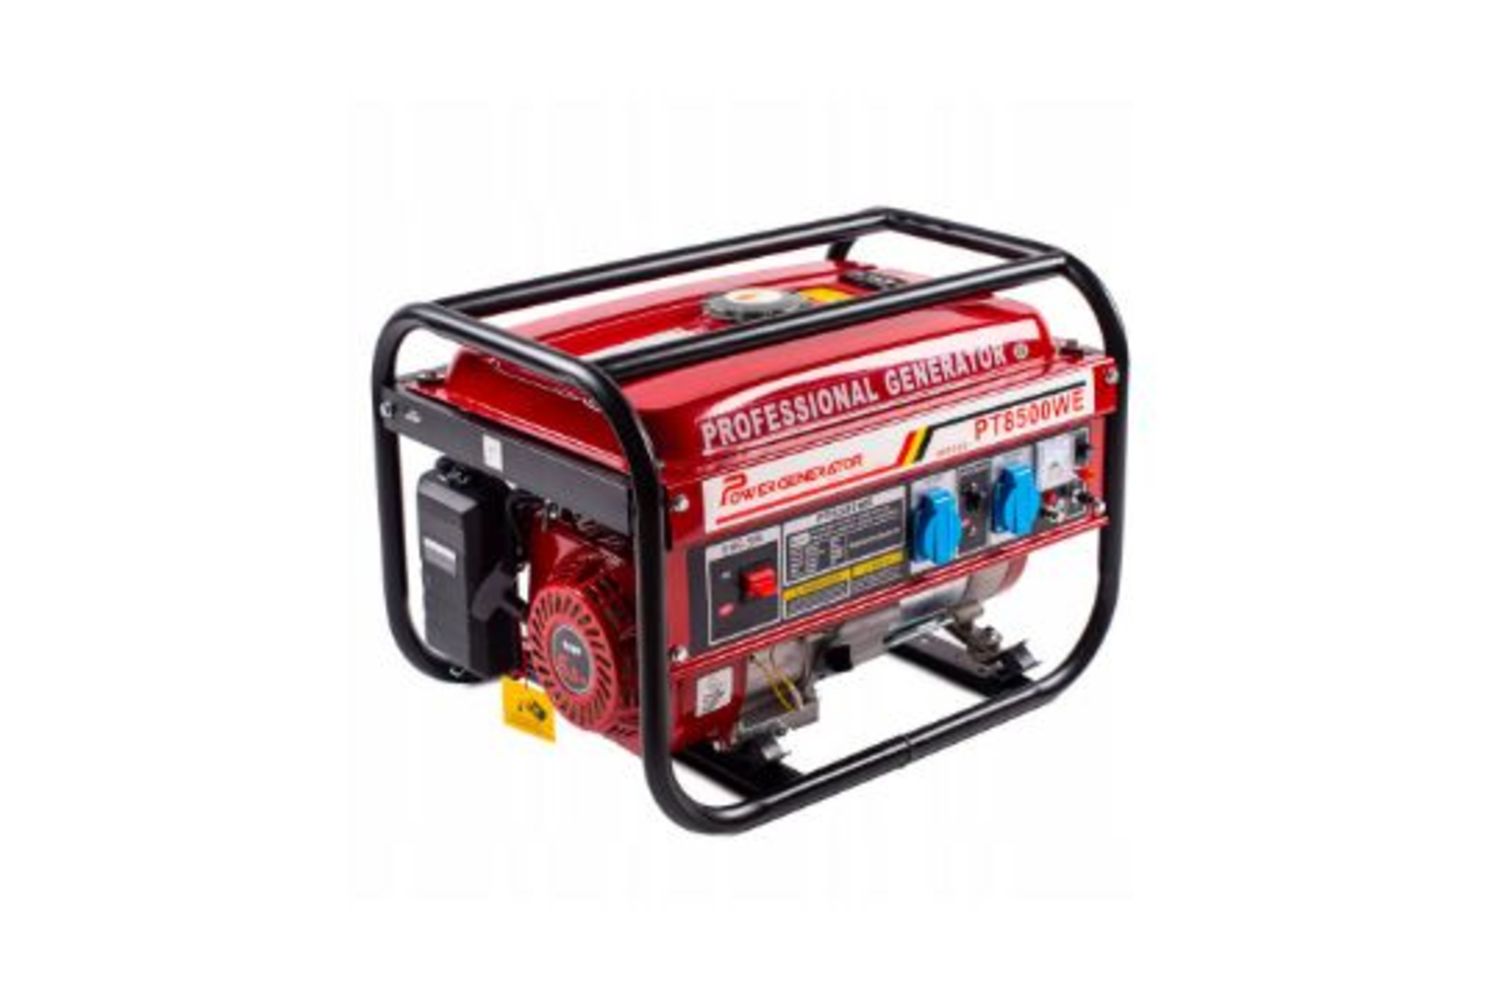 Liquidation Sale of New & Boxed Petrol Generators & Jet Washers in Single & Trade Lots - Delivery Available!